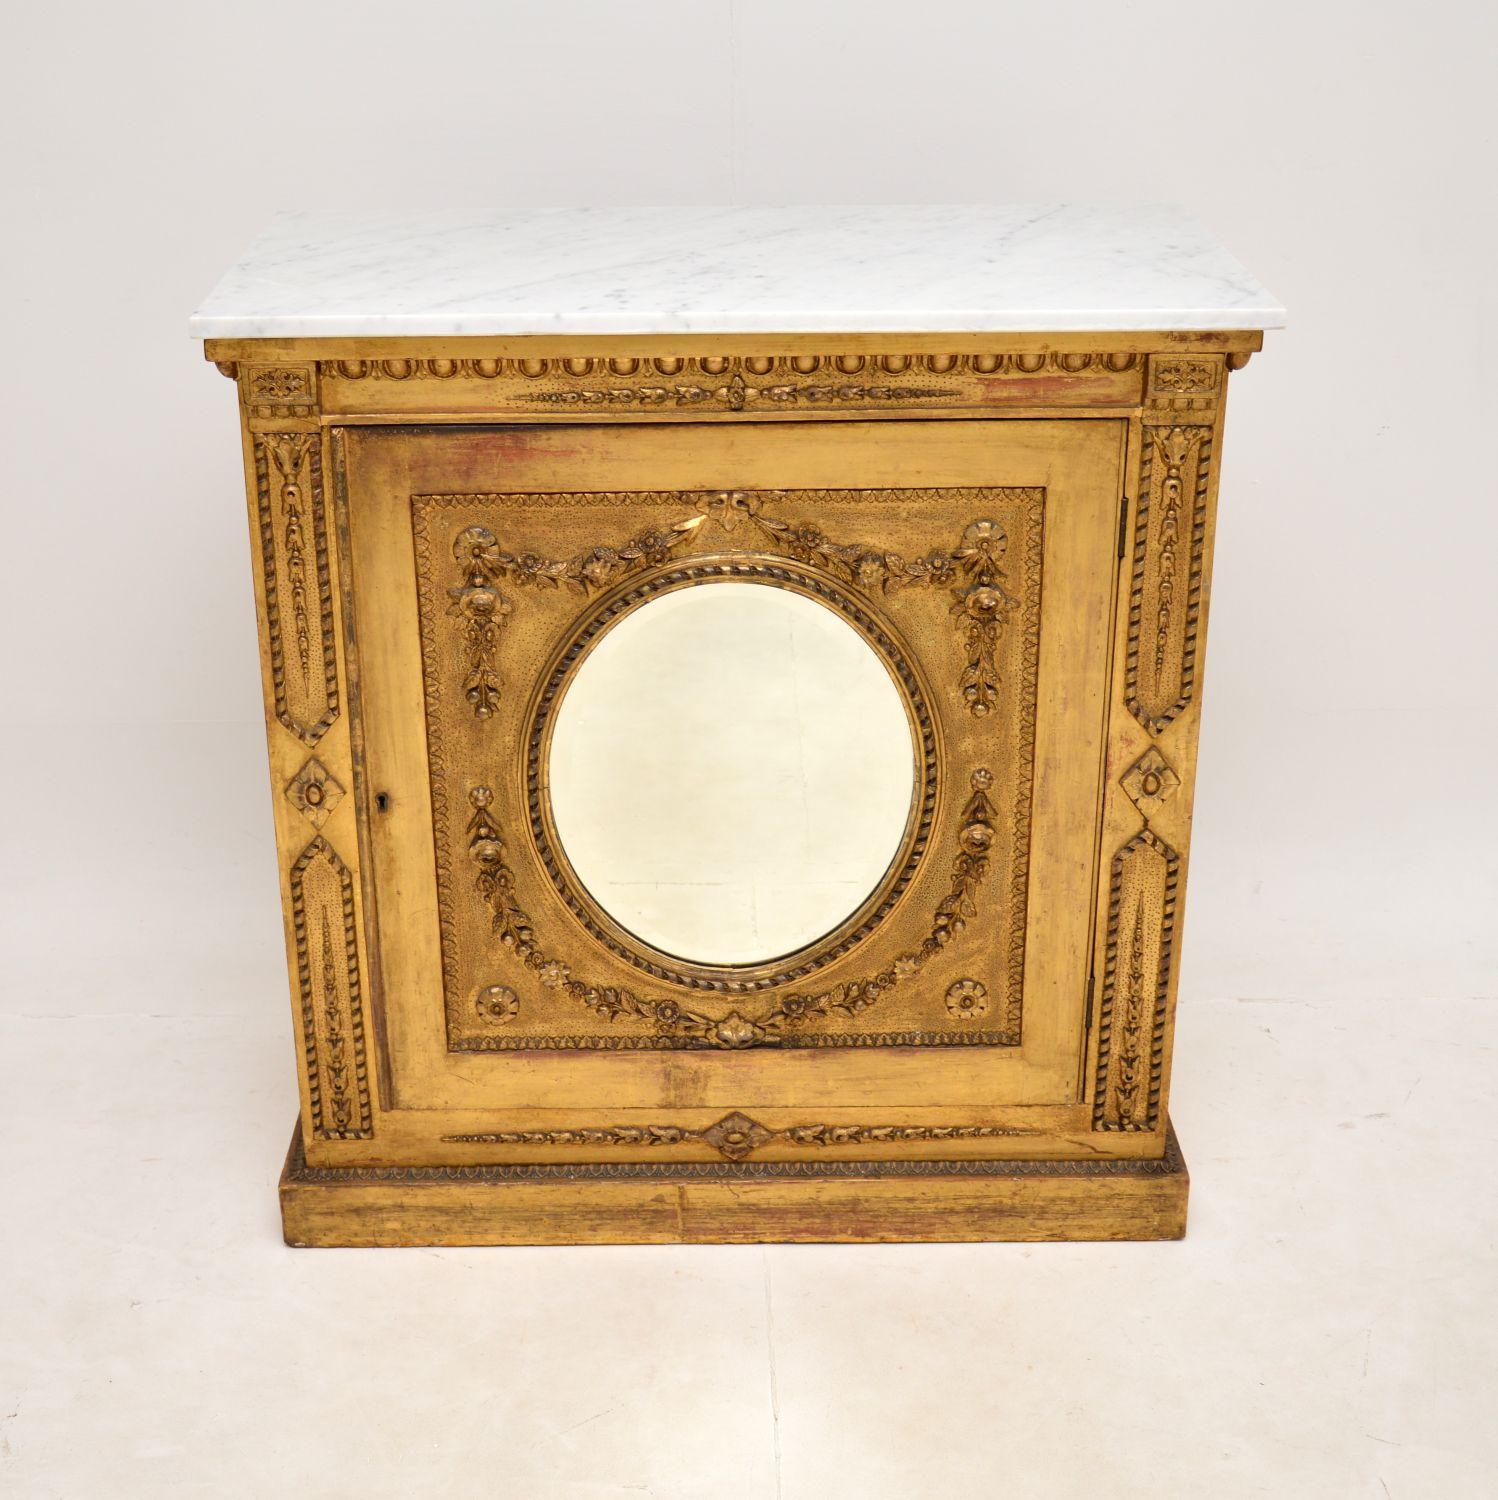 A beautiful and quite unusual antique Victorian gilt wood marble top cabinet. This was made in England, it dates from around the 1860-1880 period.

It is of fantastic quality, this is full of character and charm with stunning details throughout. The